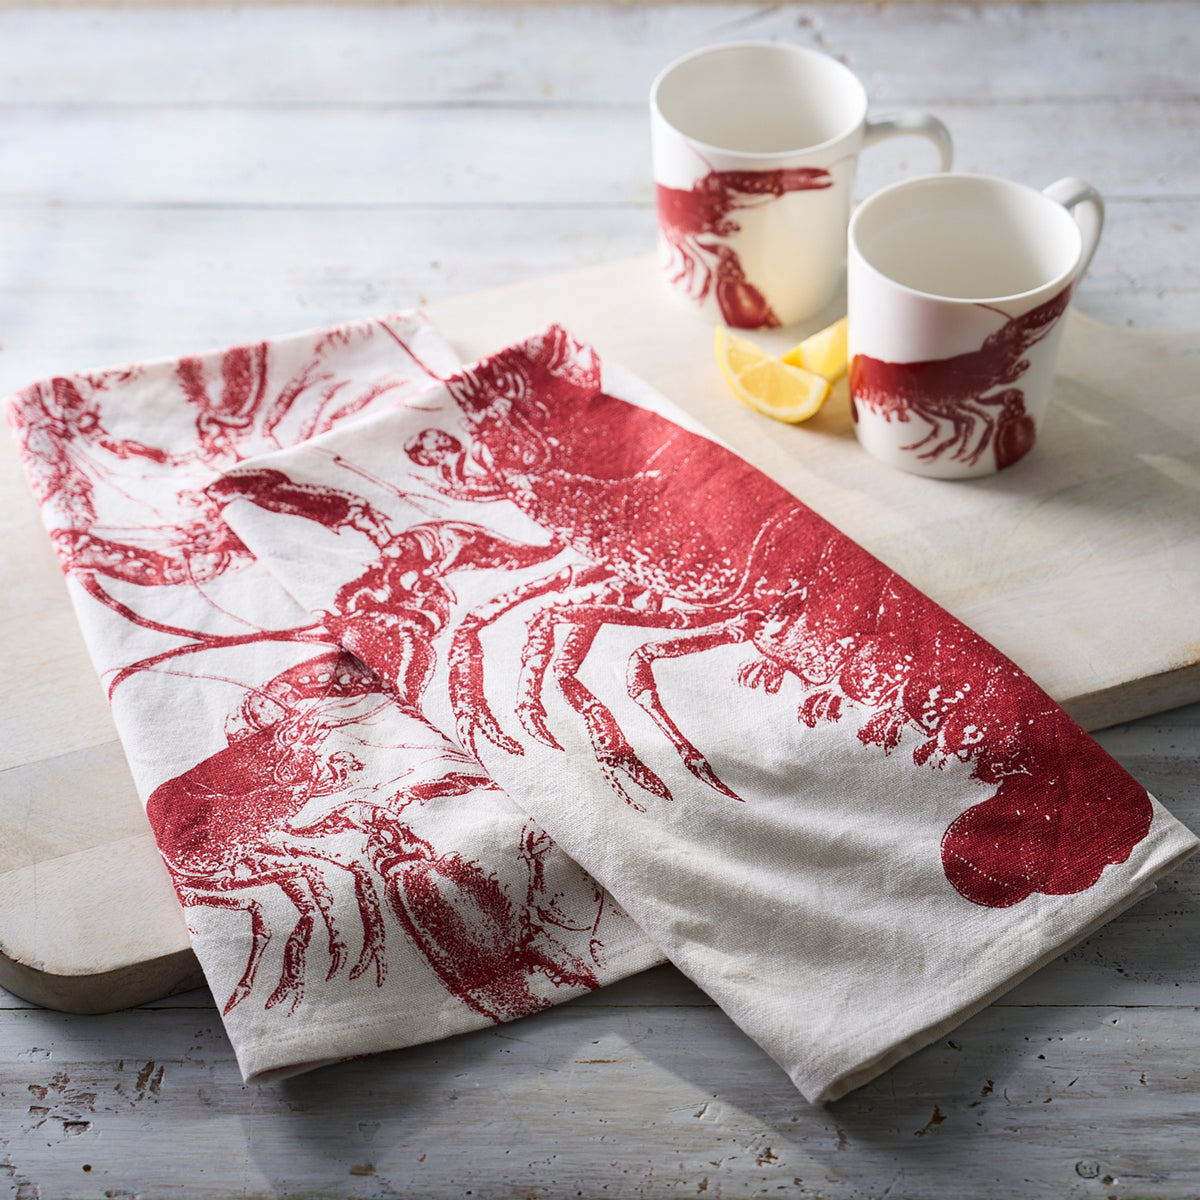 Two Caskata Father&#39;s Day Bundle mugs with red prints sit next to a lemon wedge and a matching lobster kitchen towel on a white wooden surface.